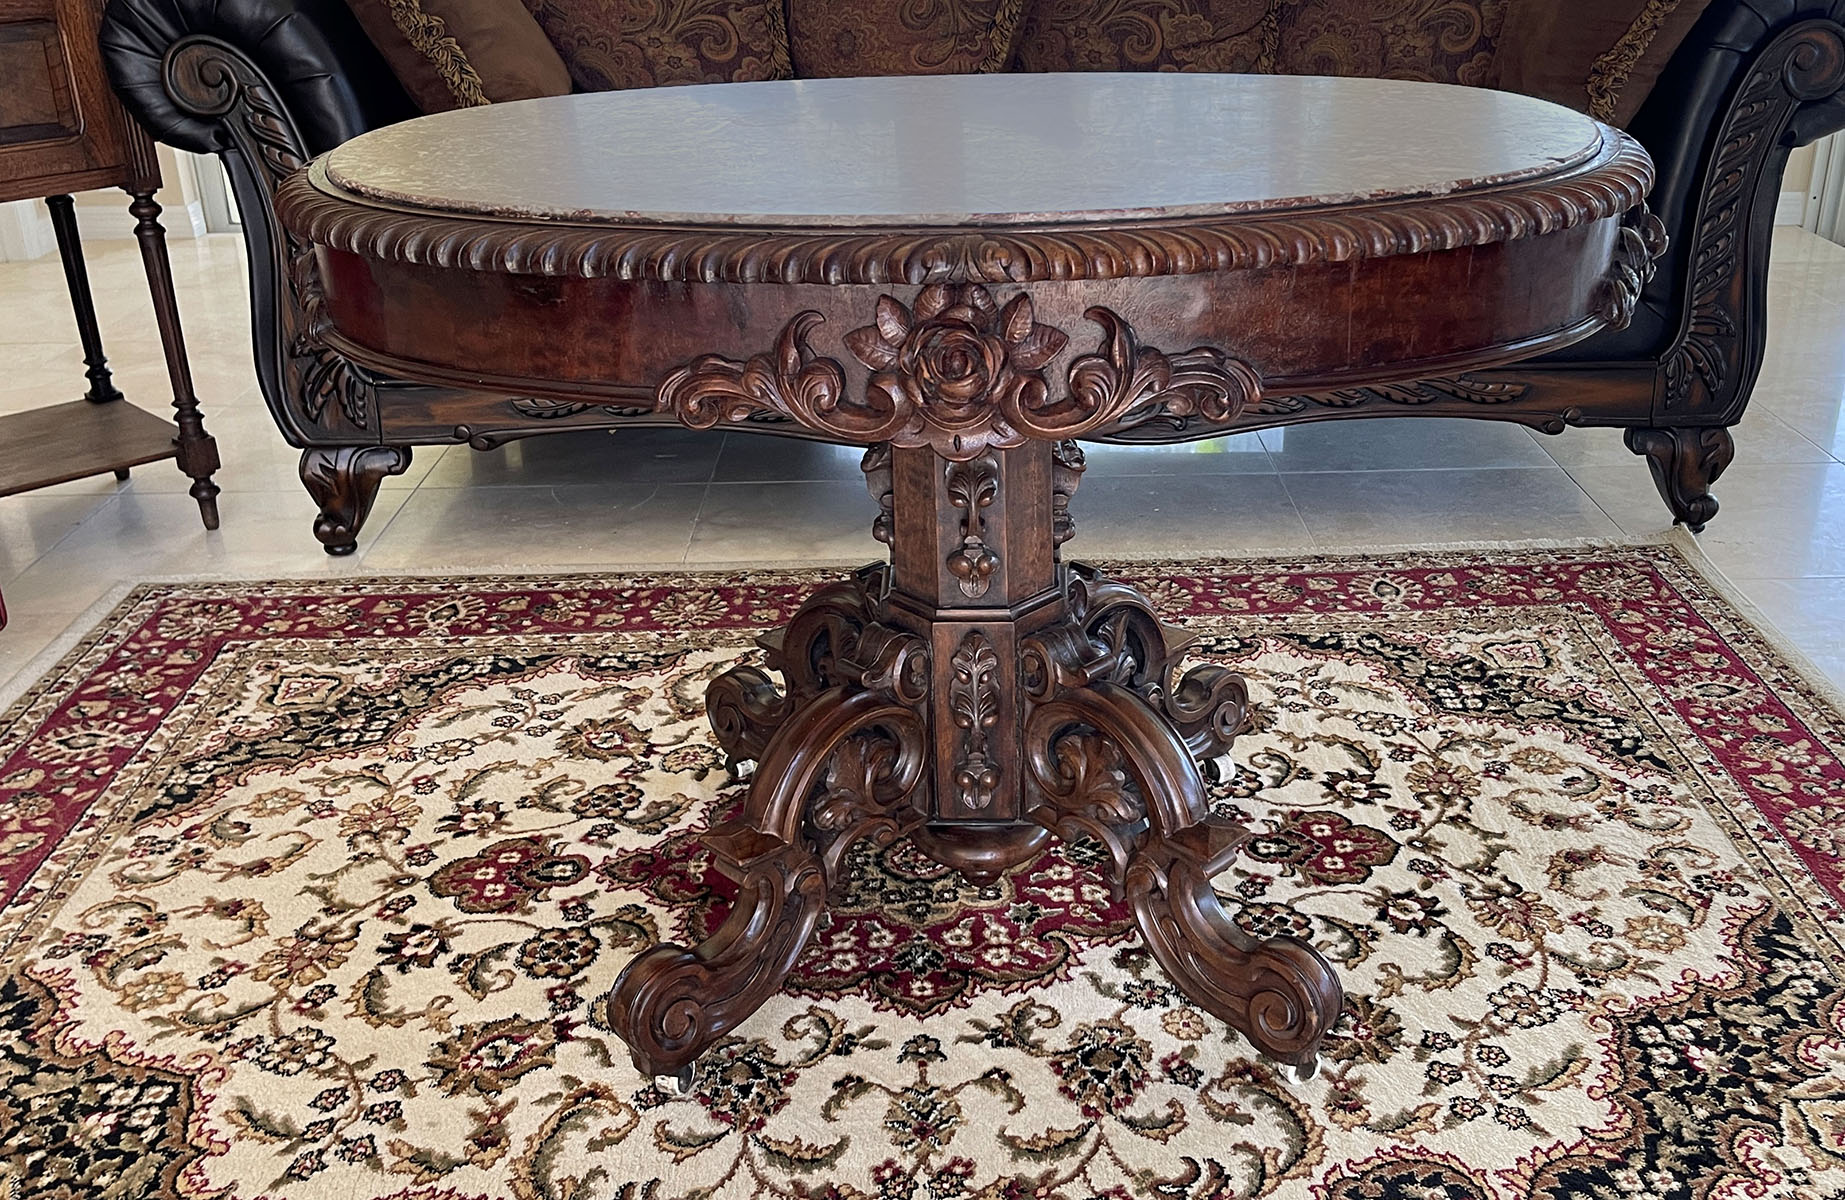 PROFUSELY CARVED OVAL MARBLE TOP